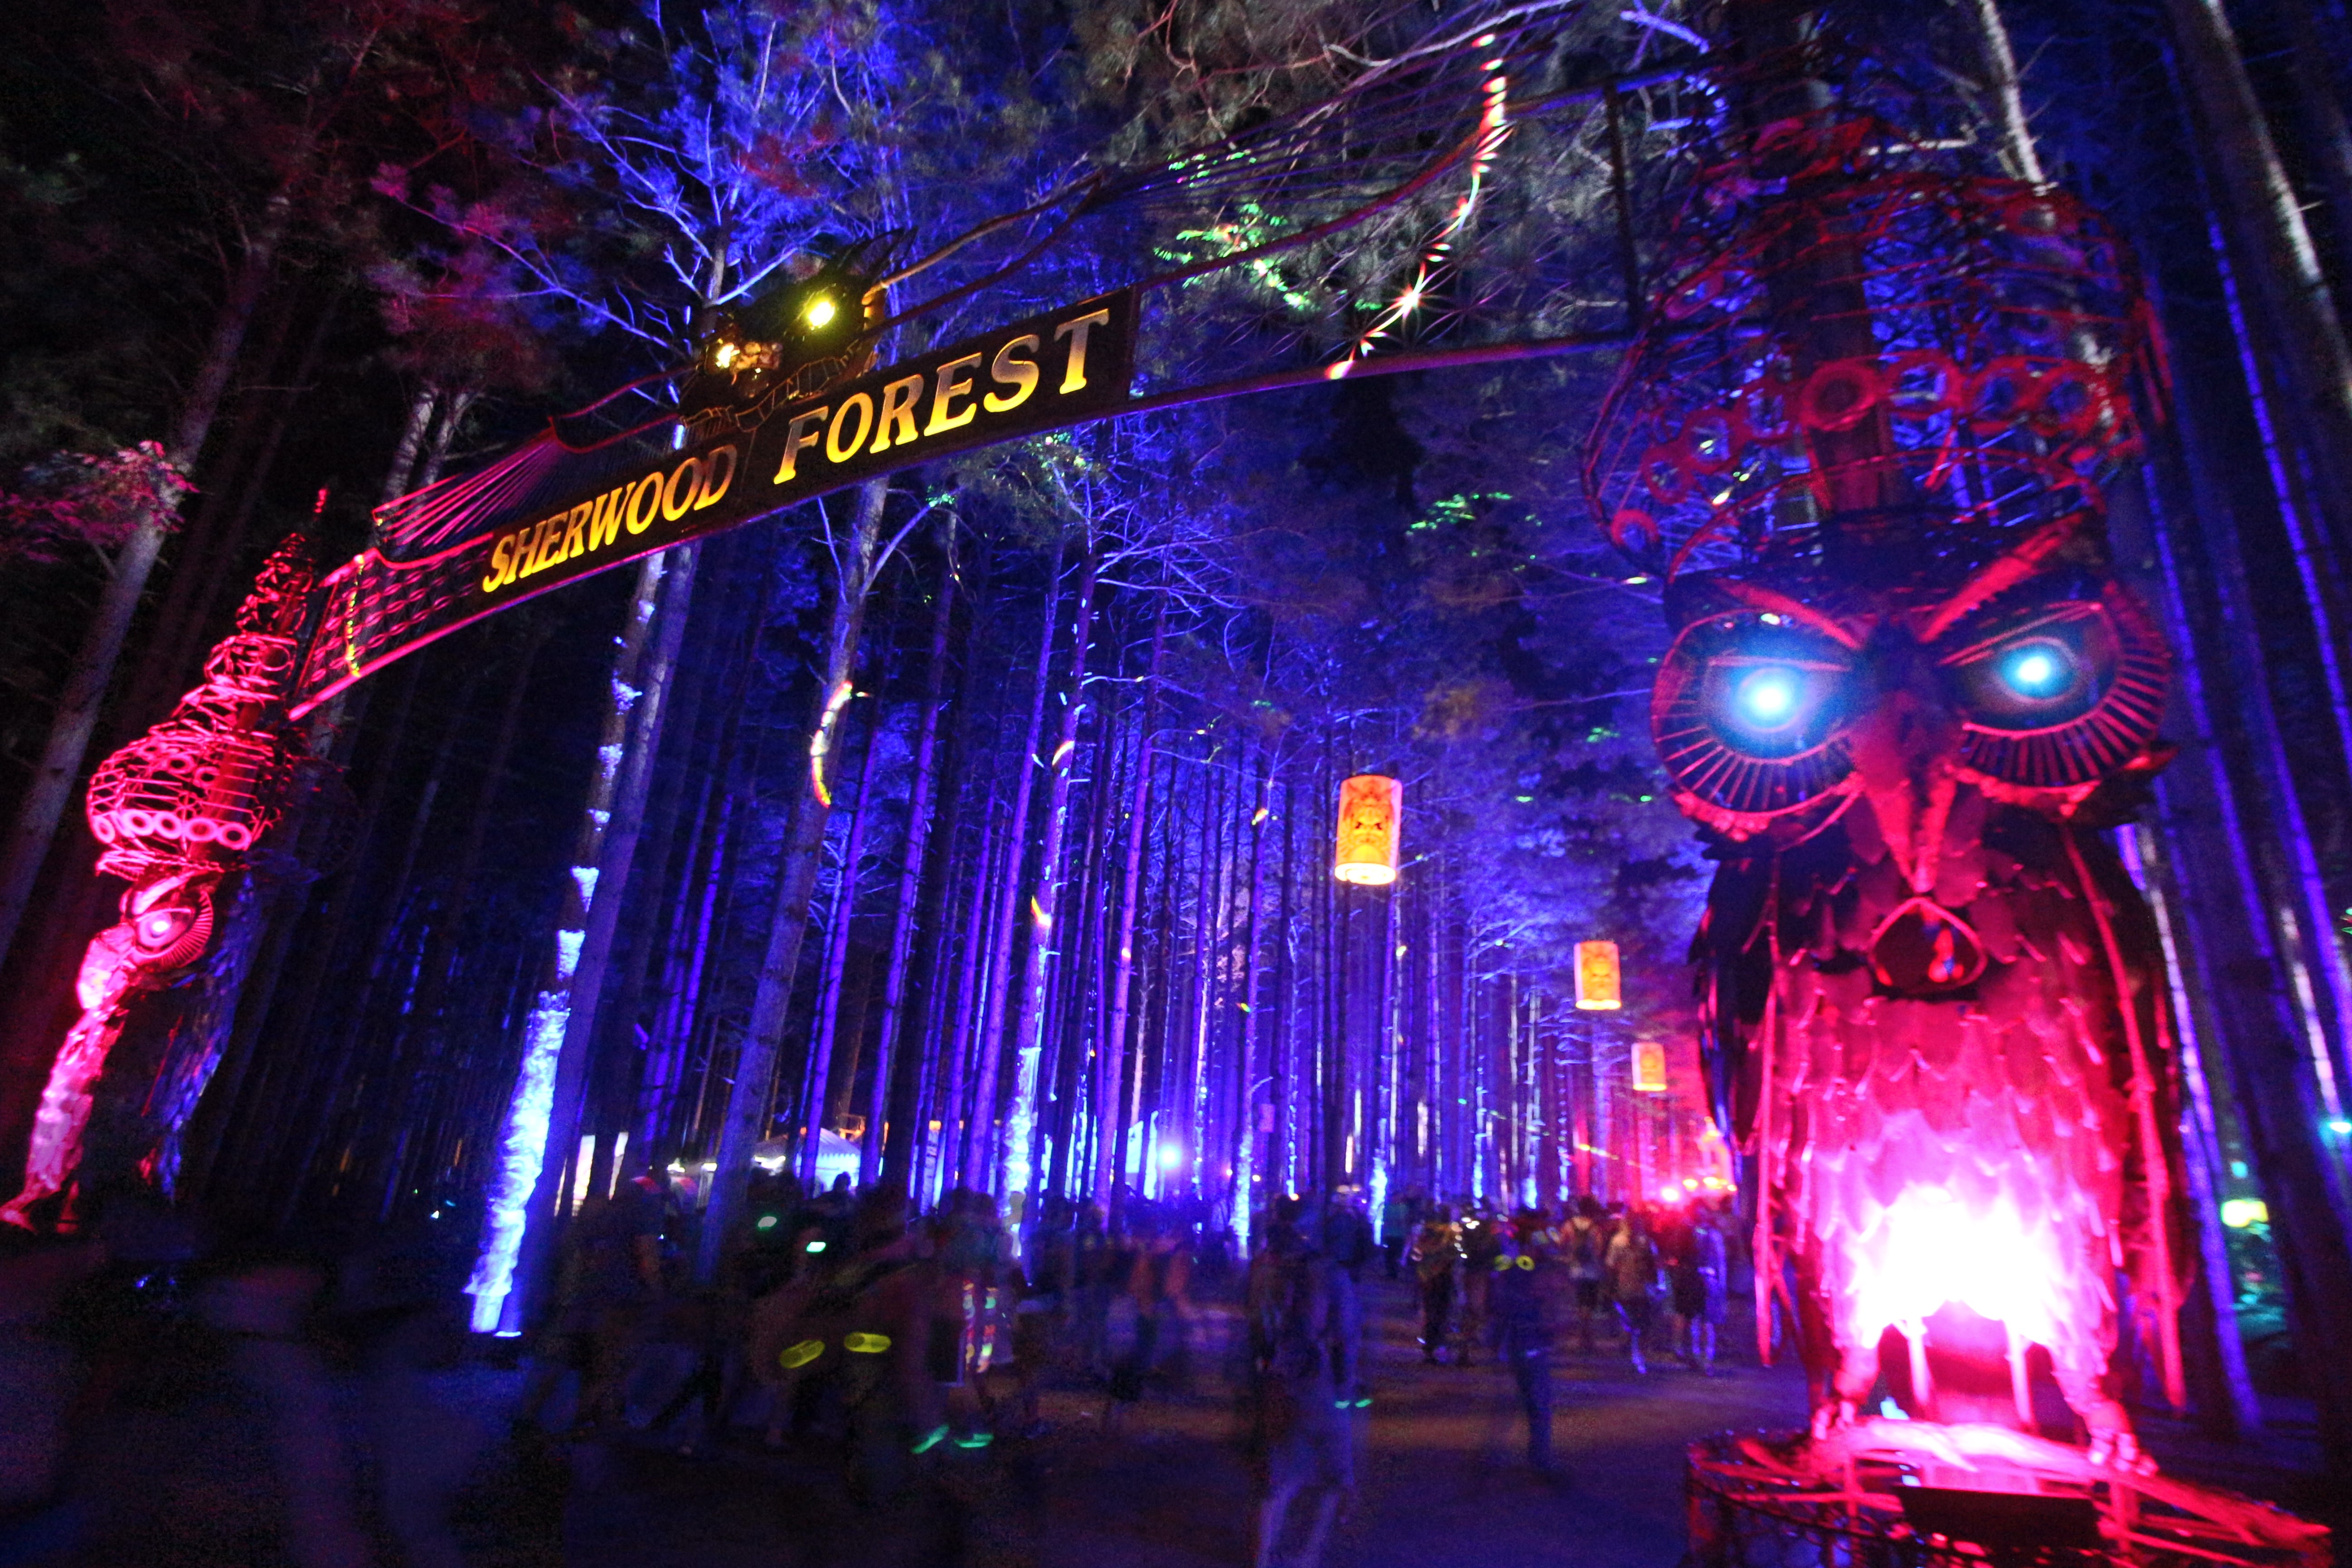 entrance gate to the electric forest festival